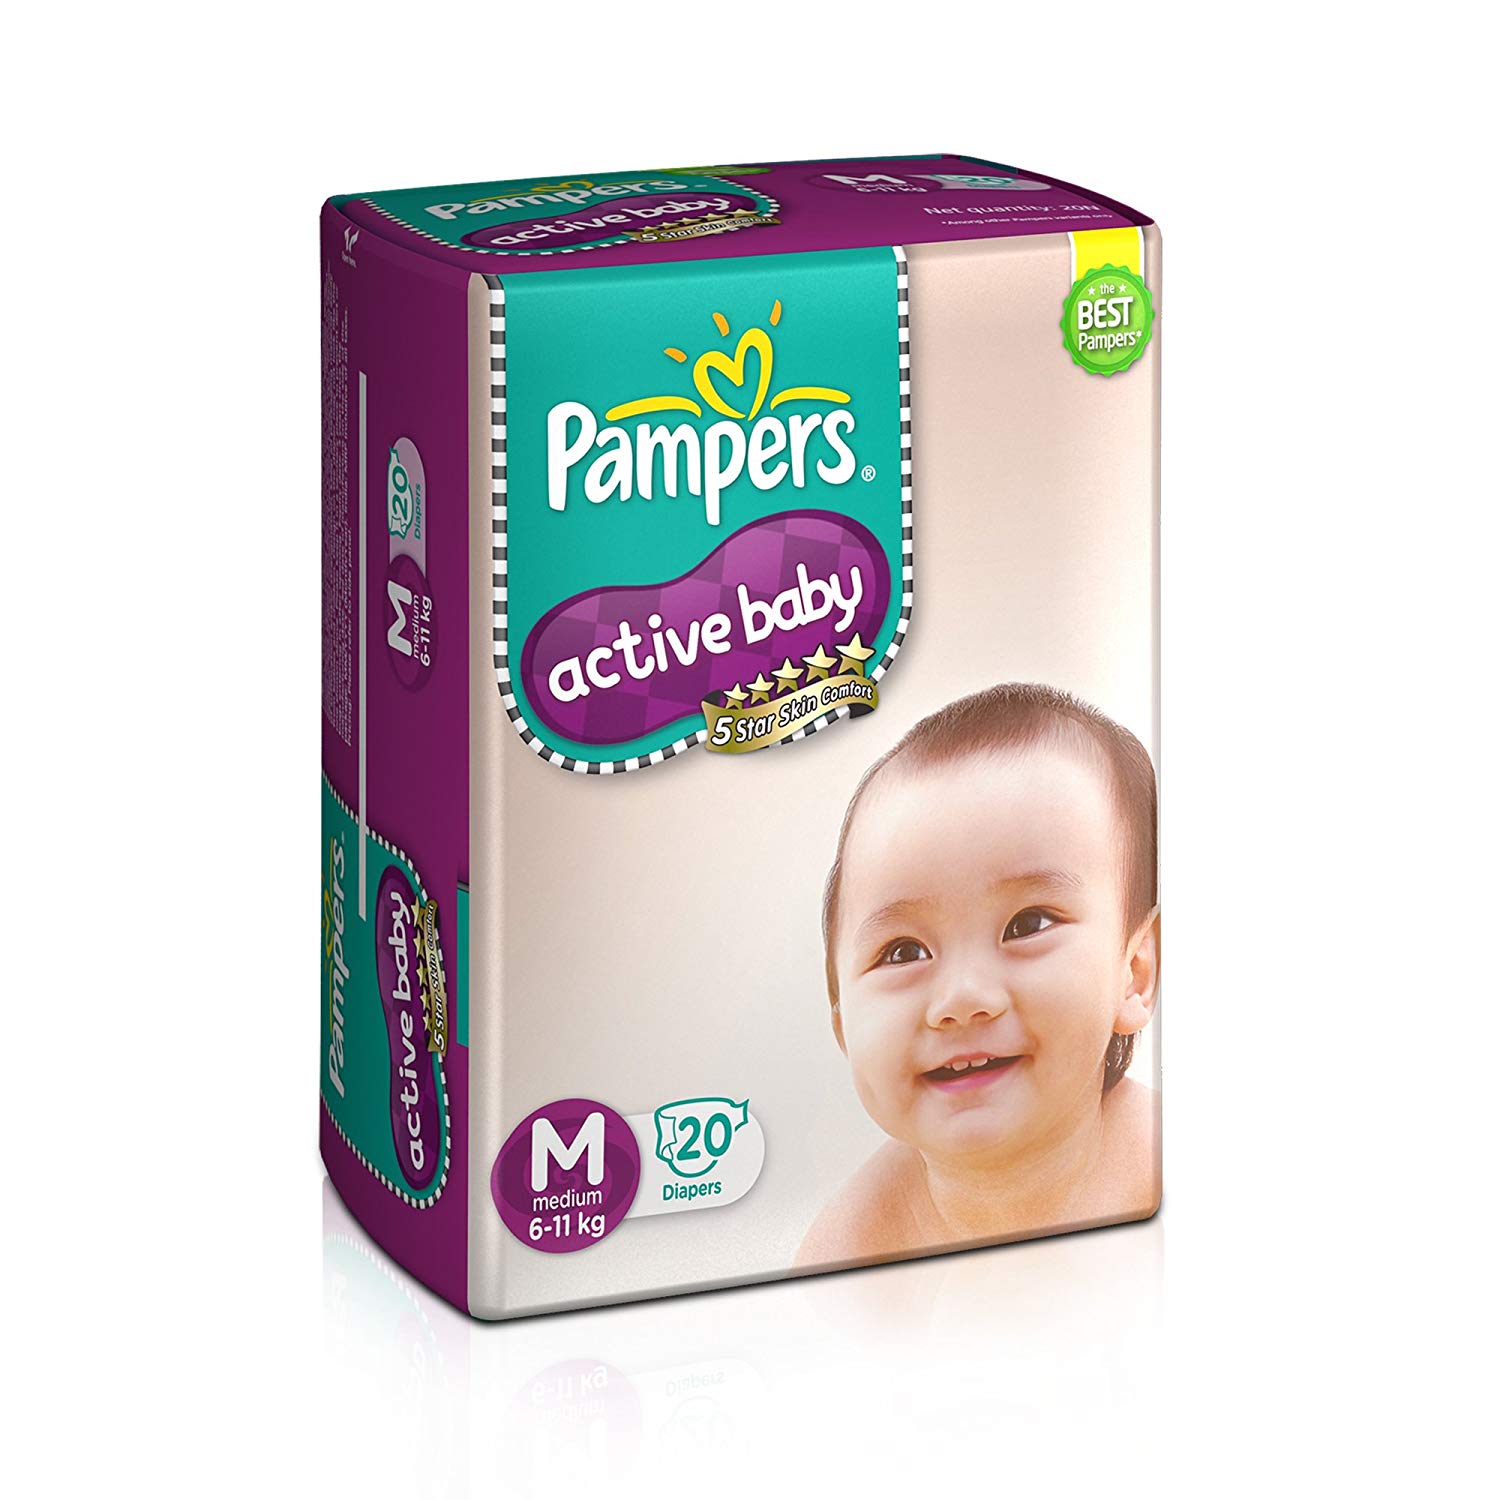 Pampers Active Baby Medium Size Diapers(20 Count)